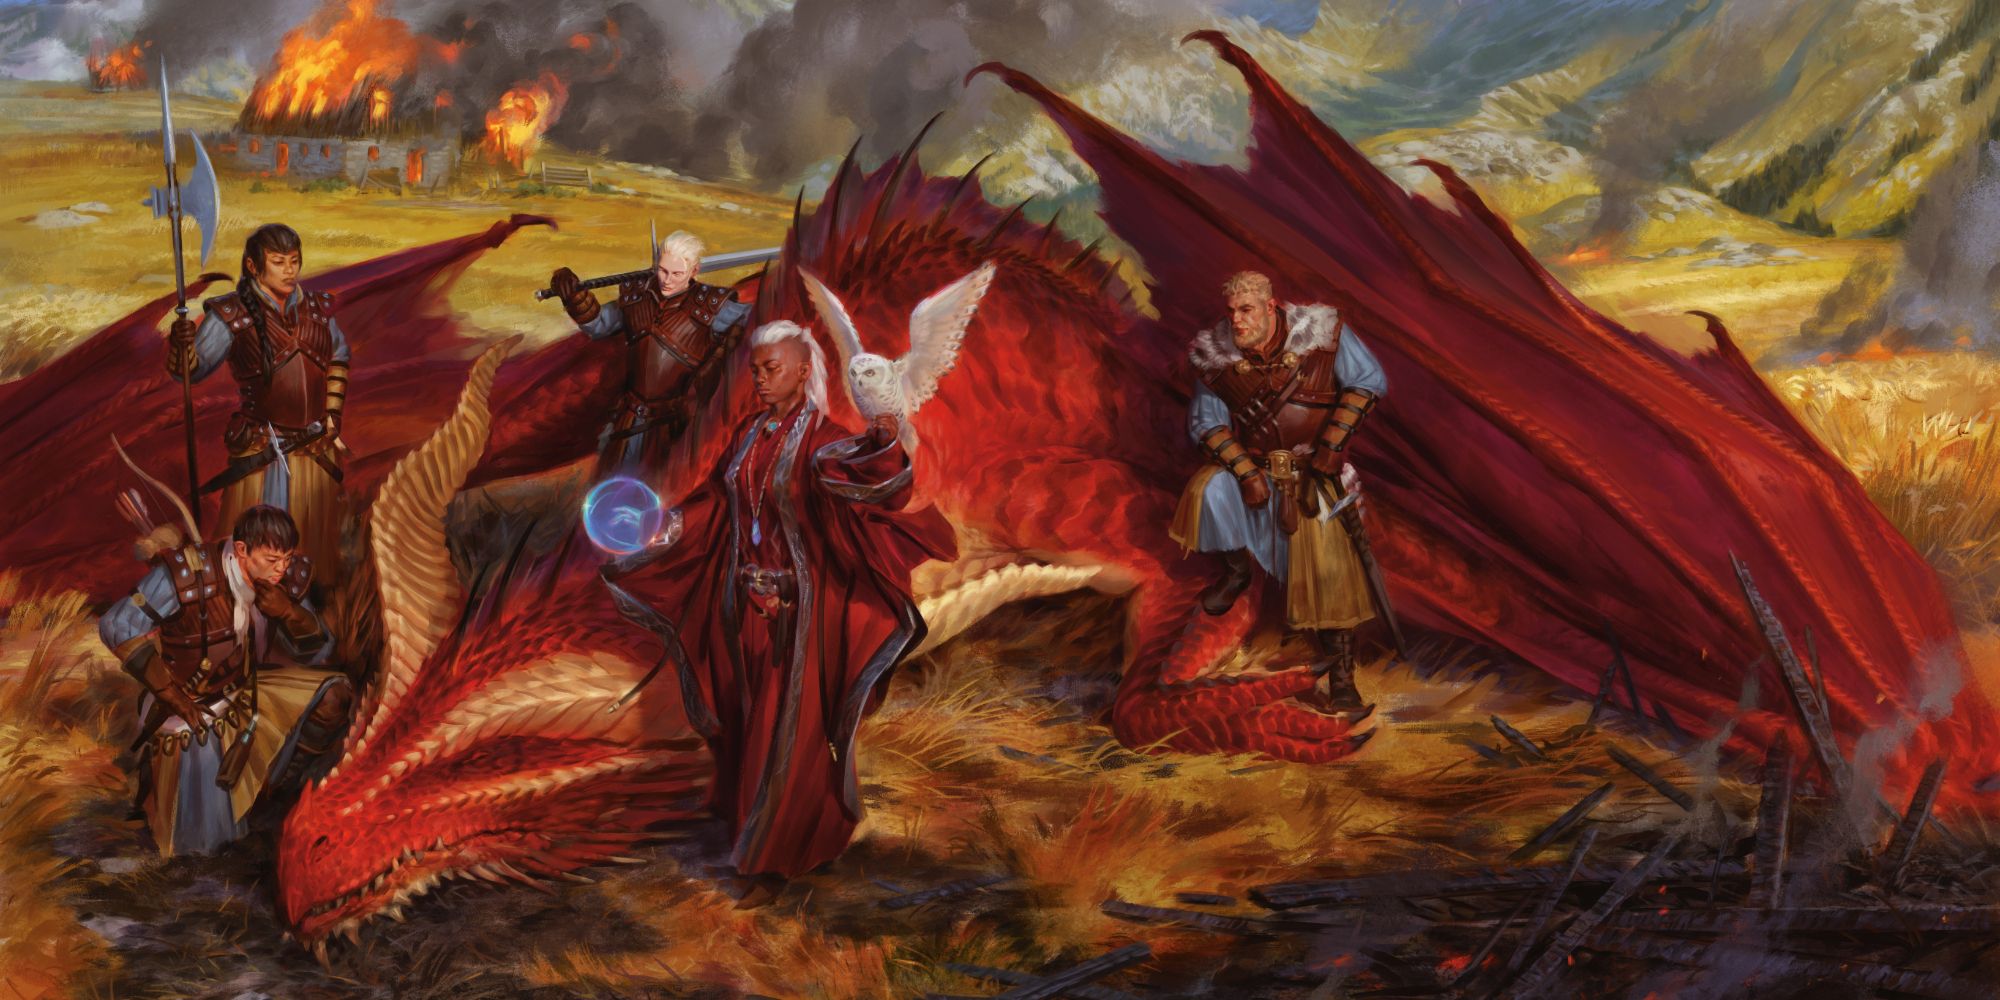 A party of D&D adventurers surrounding a red dragon.